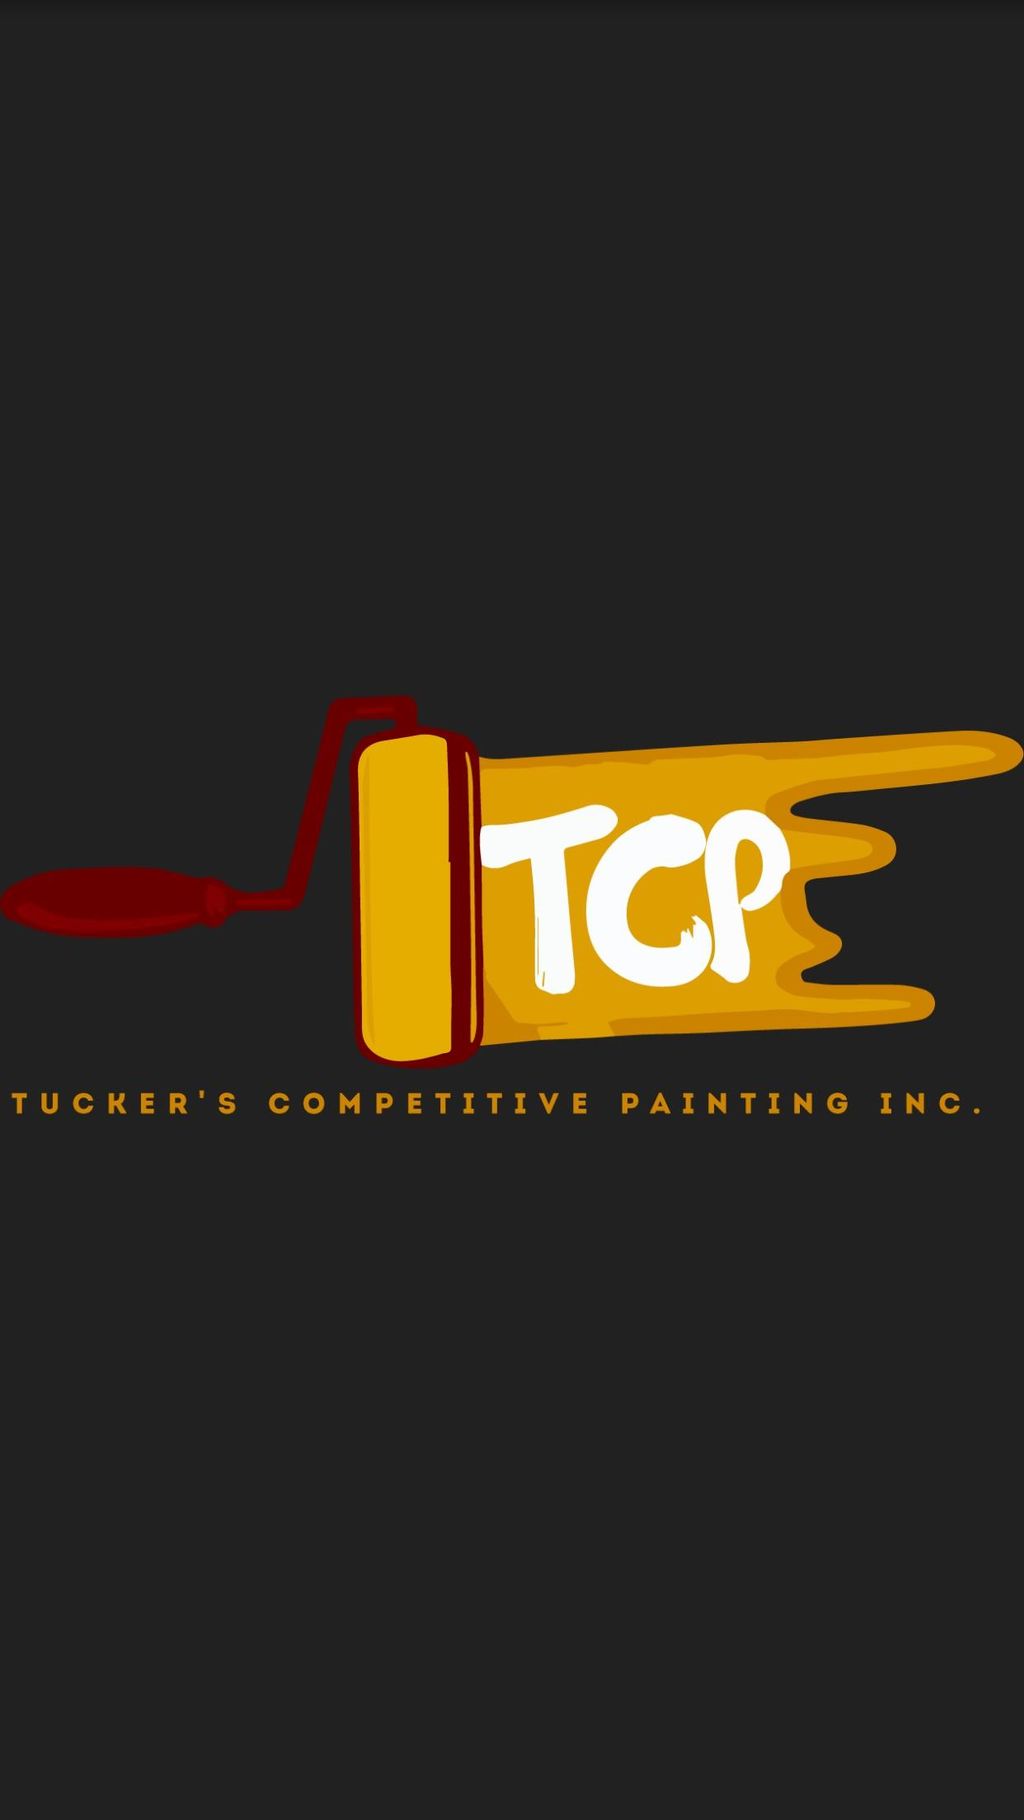 Tucker’s Competitive Painting Inc.